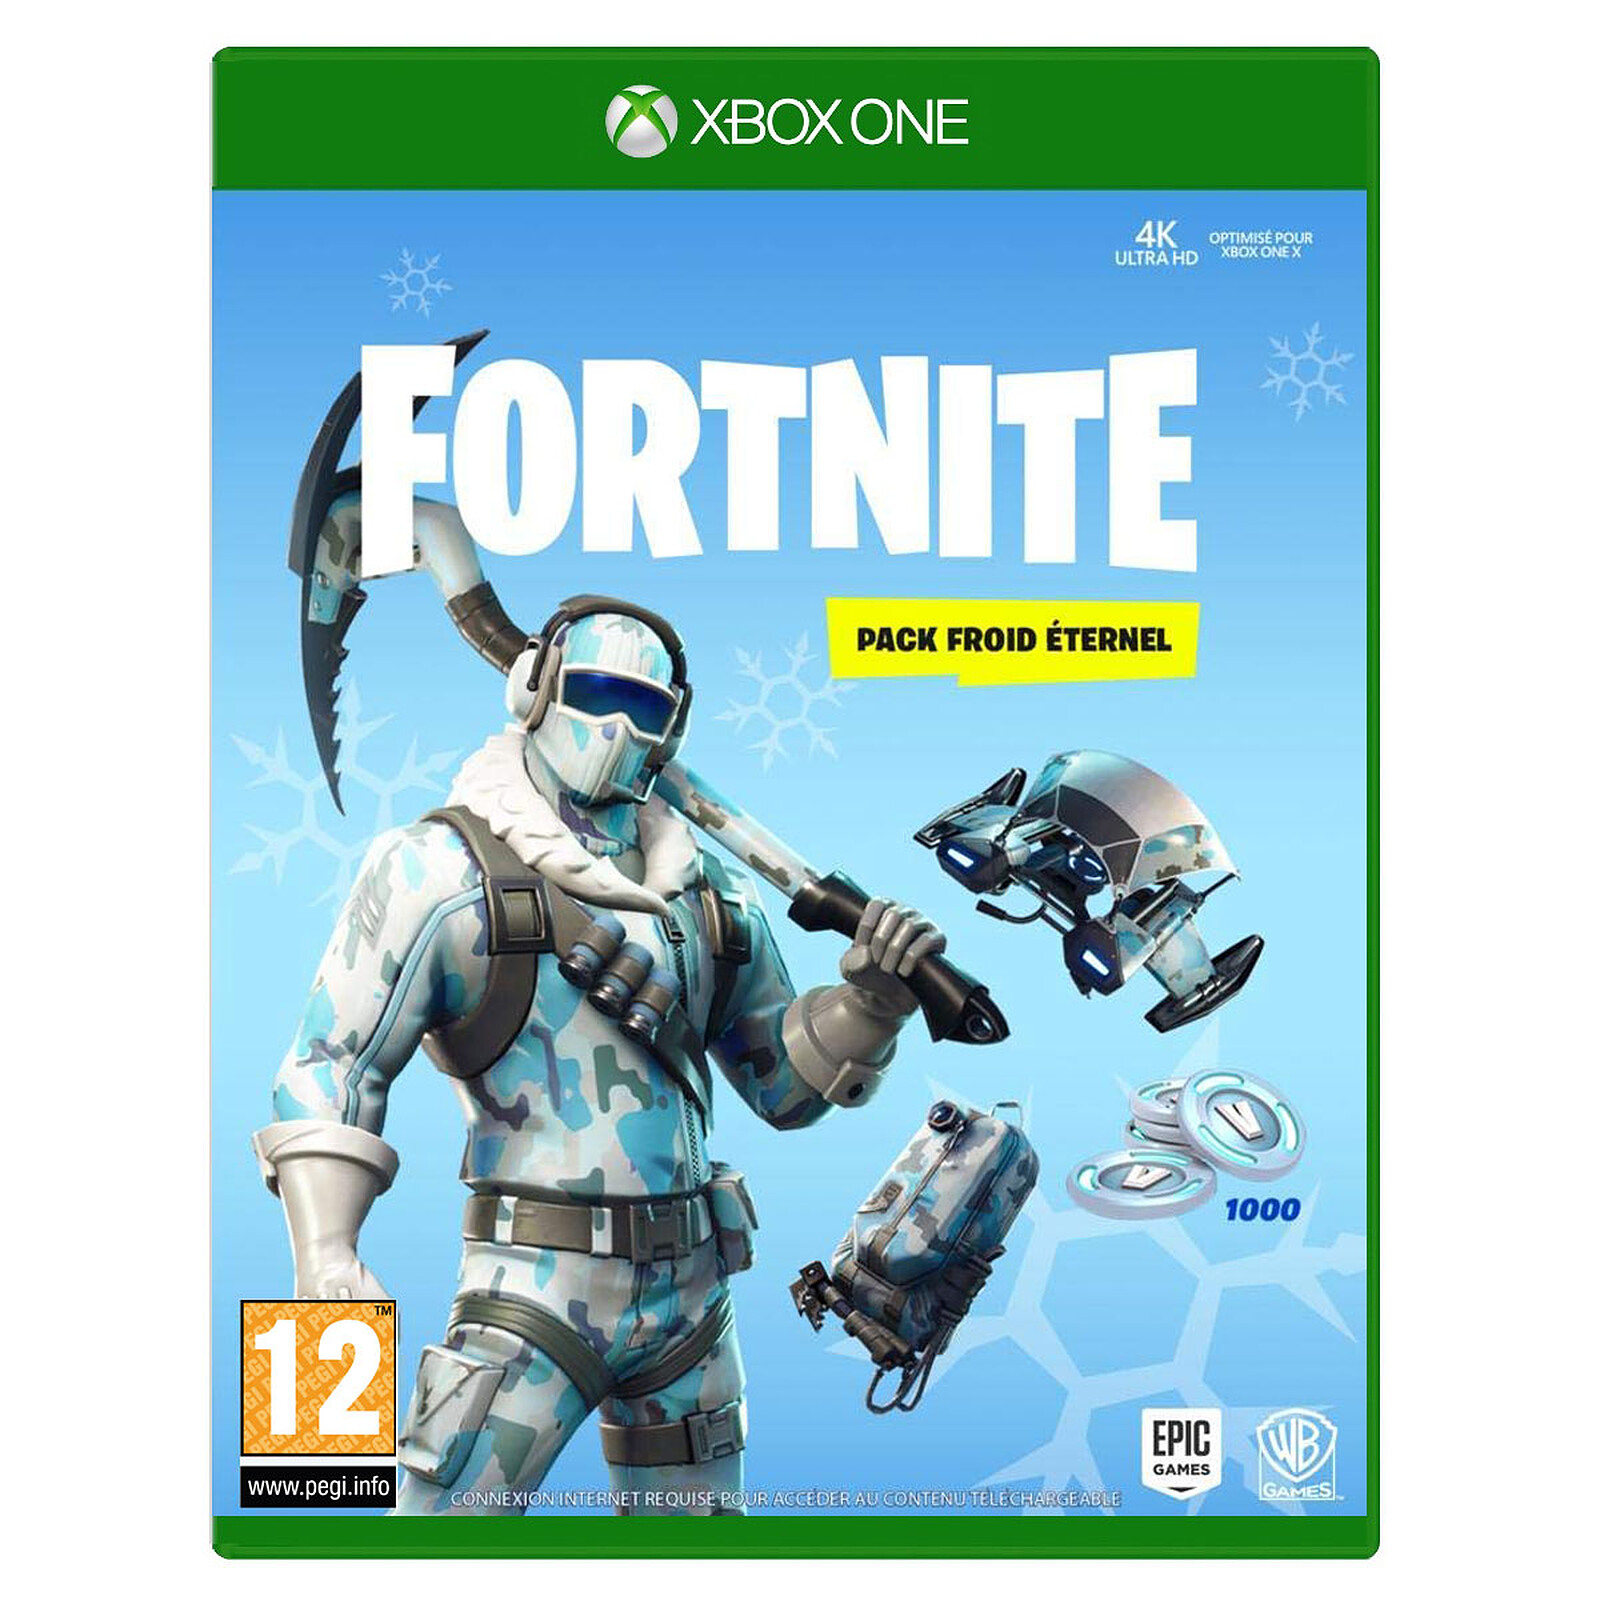 Fortnite Pack Froid Eternel Xbox One Jeux Xbox One Epic Games - fortnite pack froid eternel xbox one